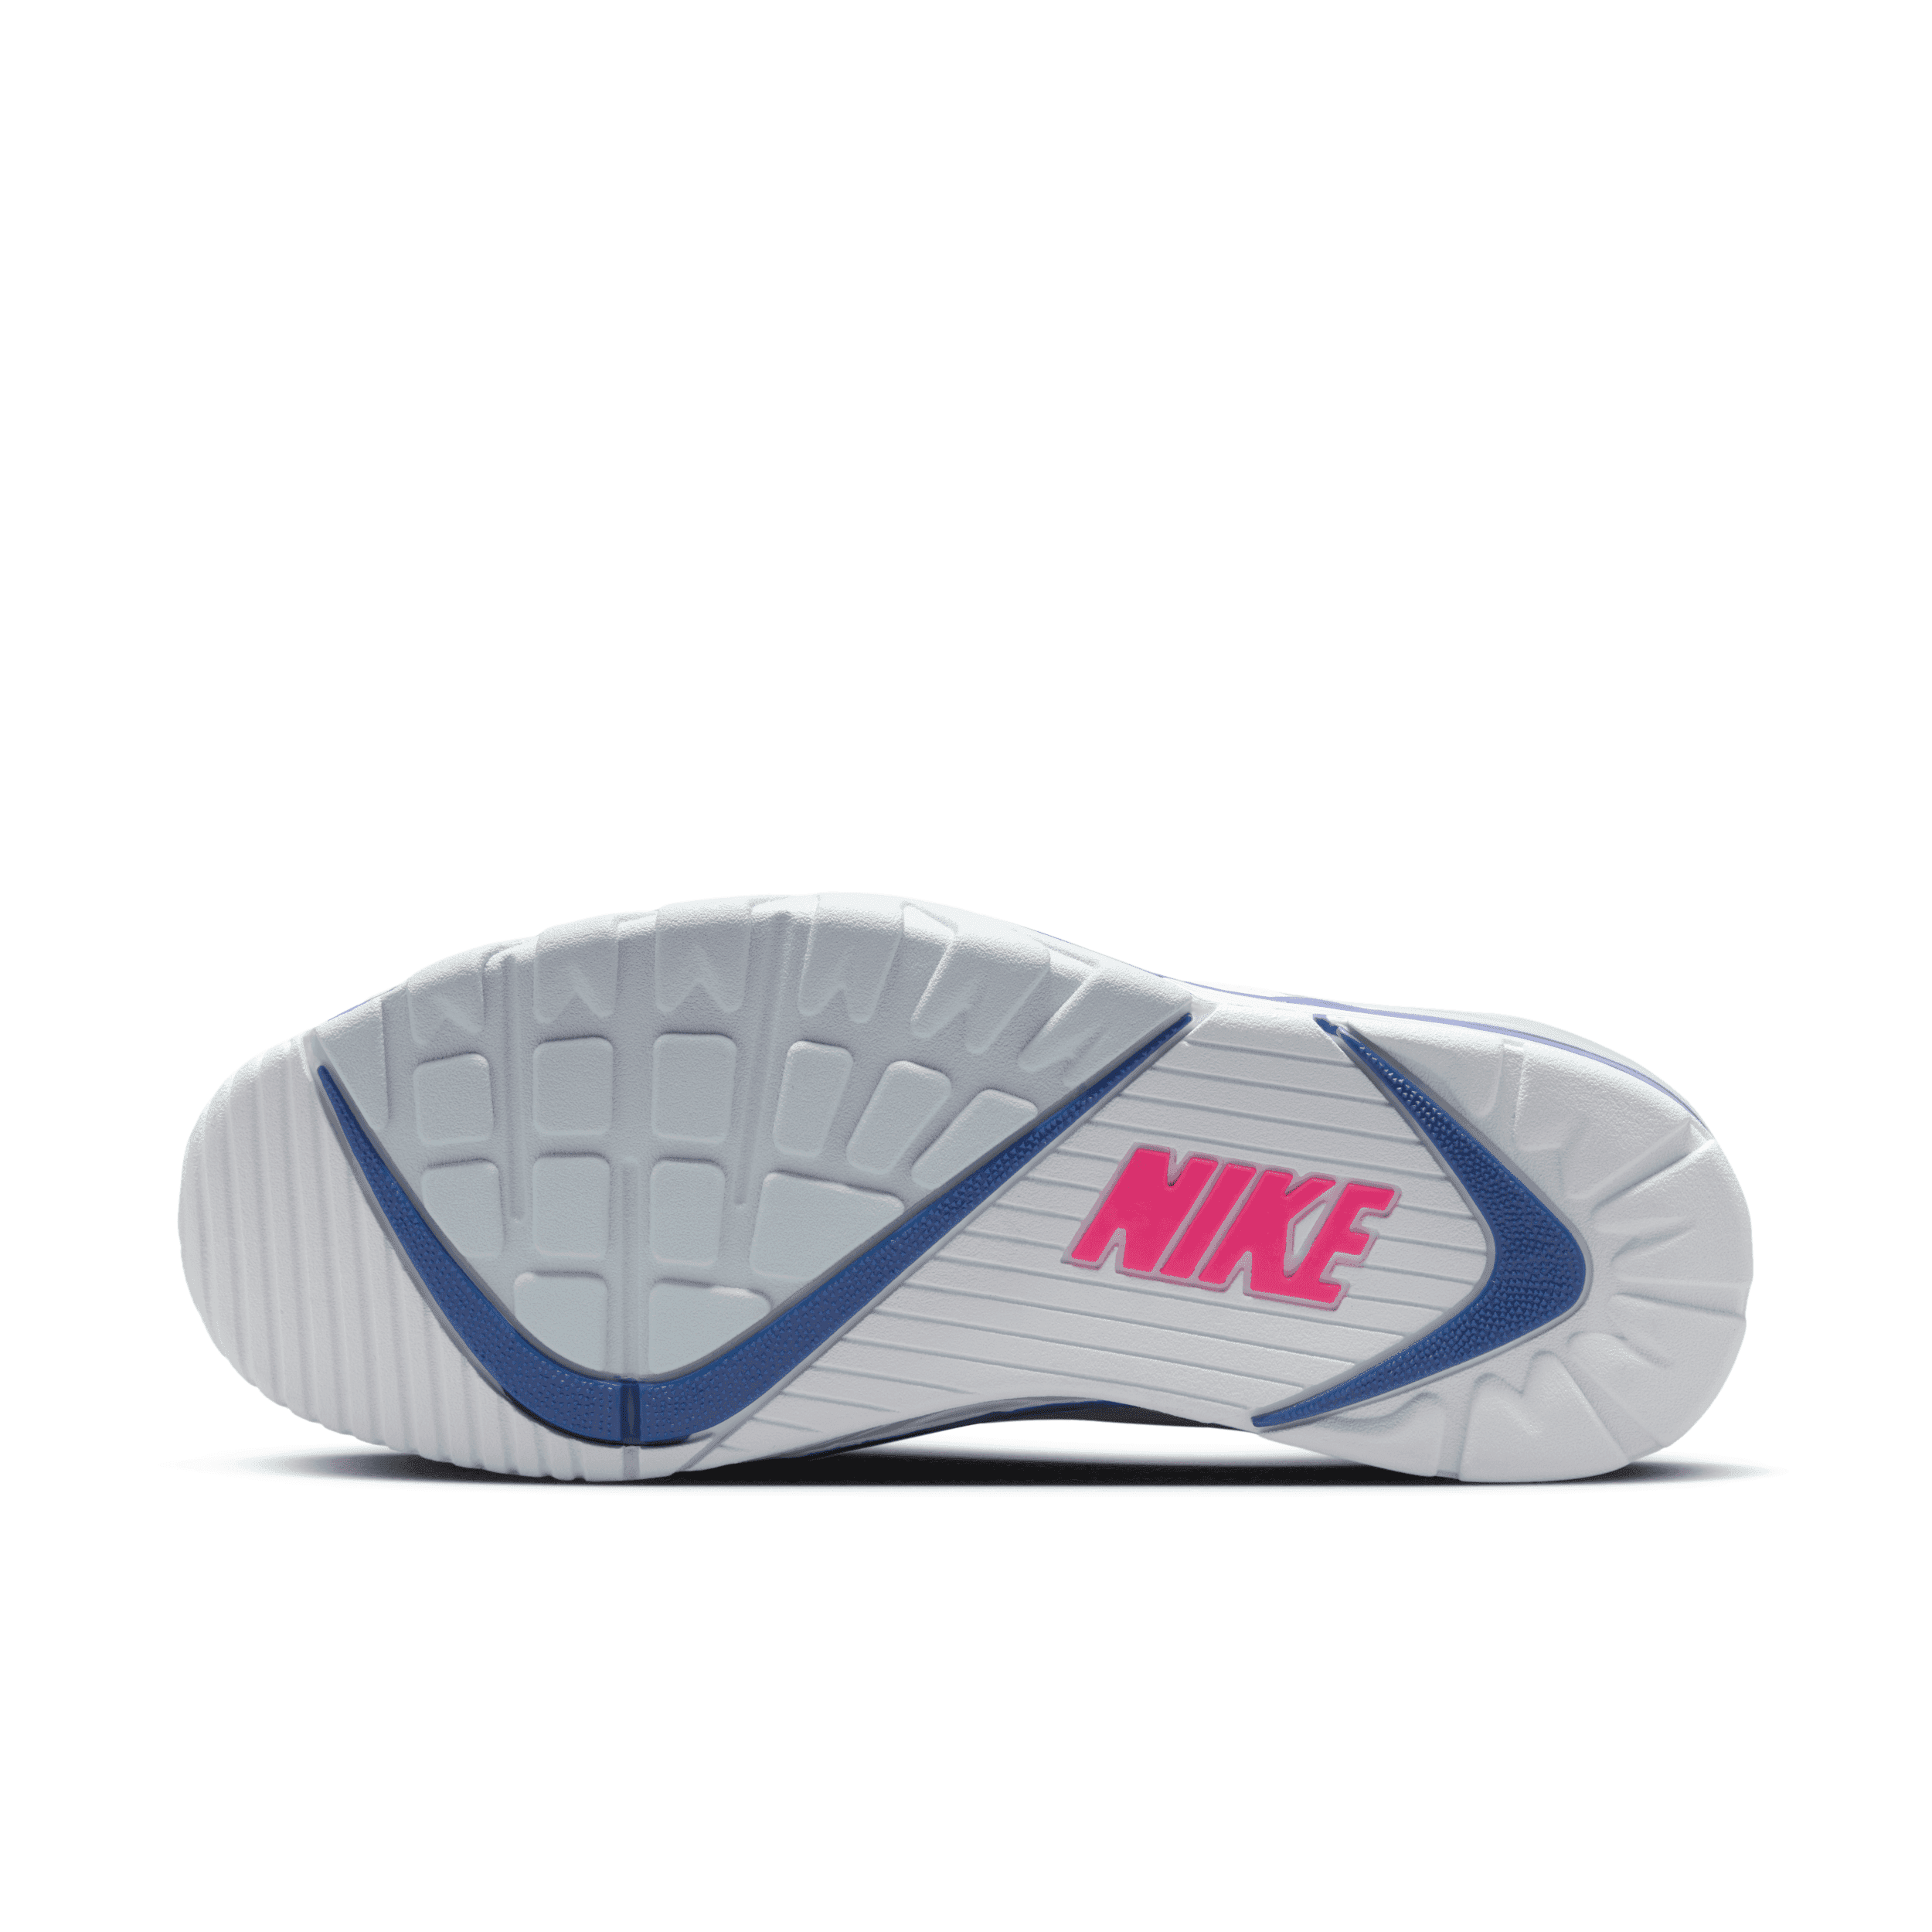 The Nike Air Cross Trainer 3 Low Takes On Hyper Pink and Racer Blue